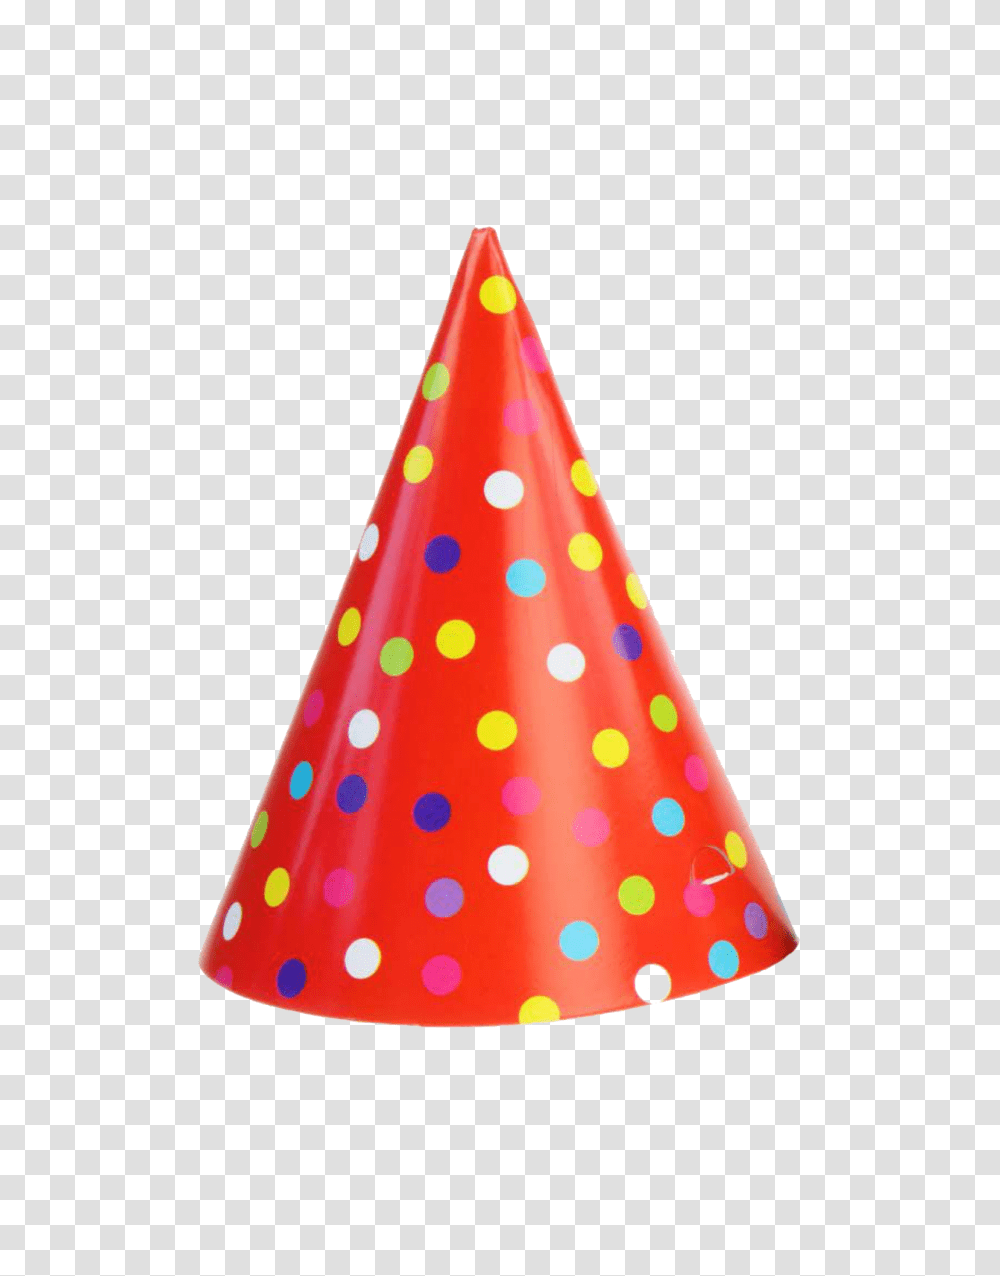 Red Child Party Hat Images, Apparel, Cone, Christmas Tree Transparent Png